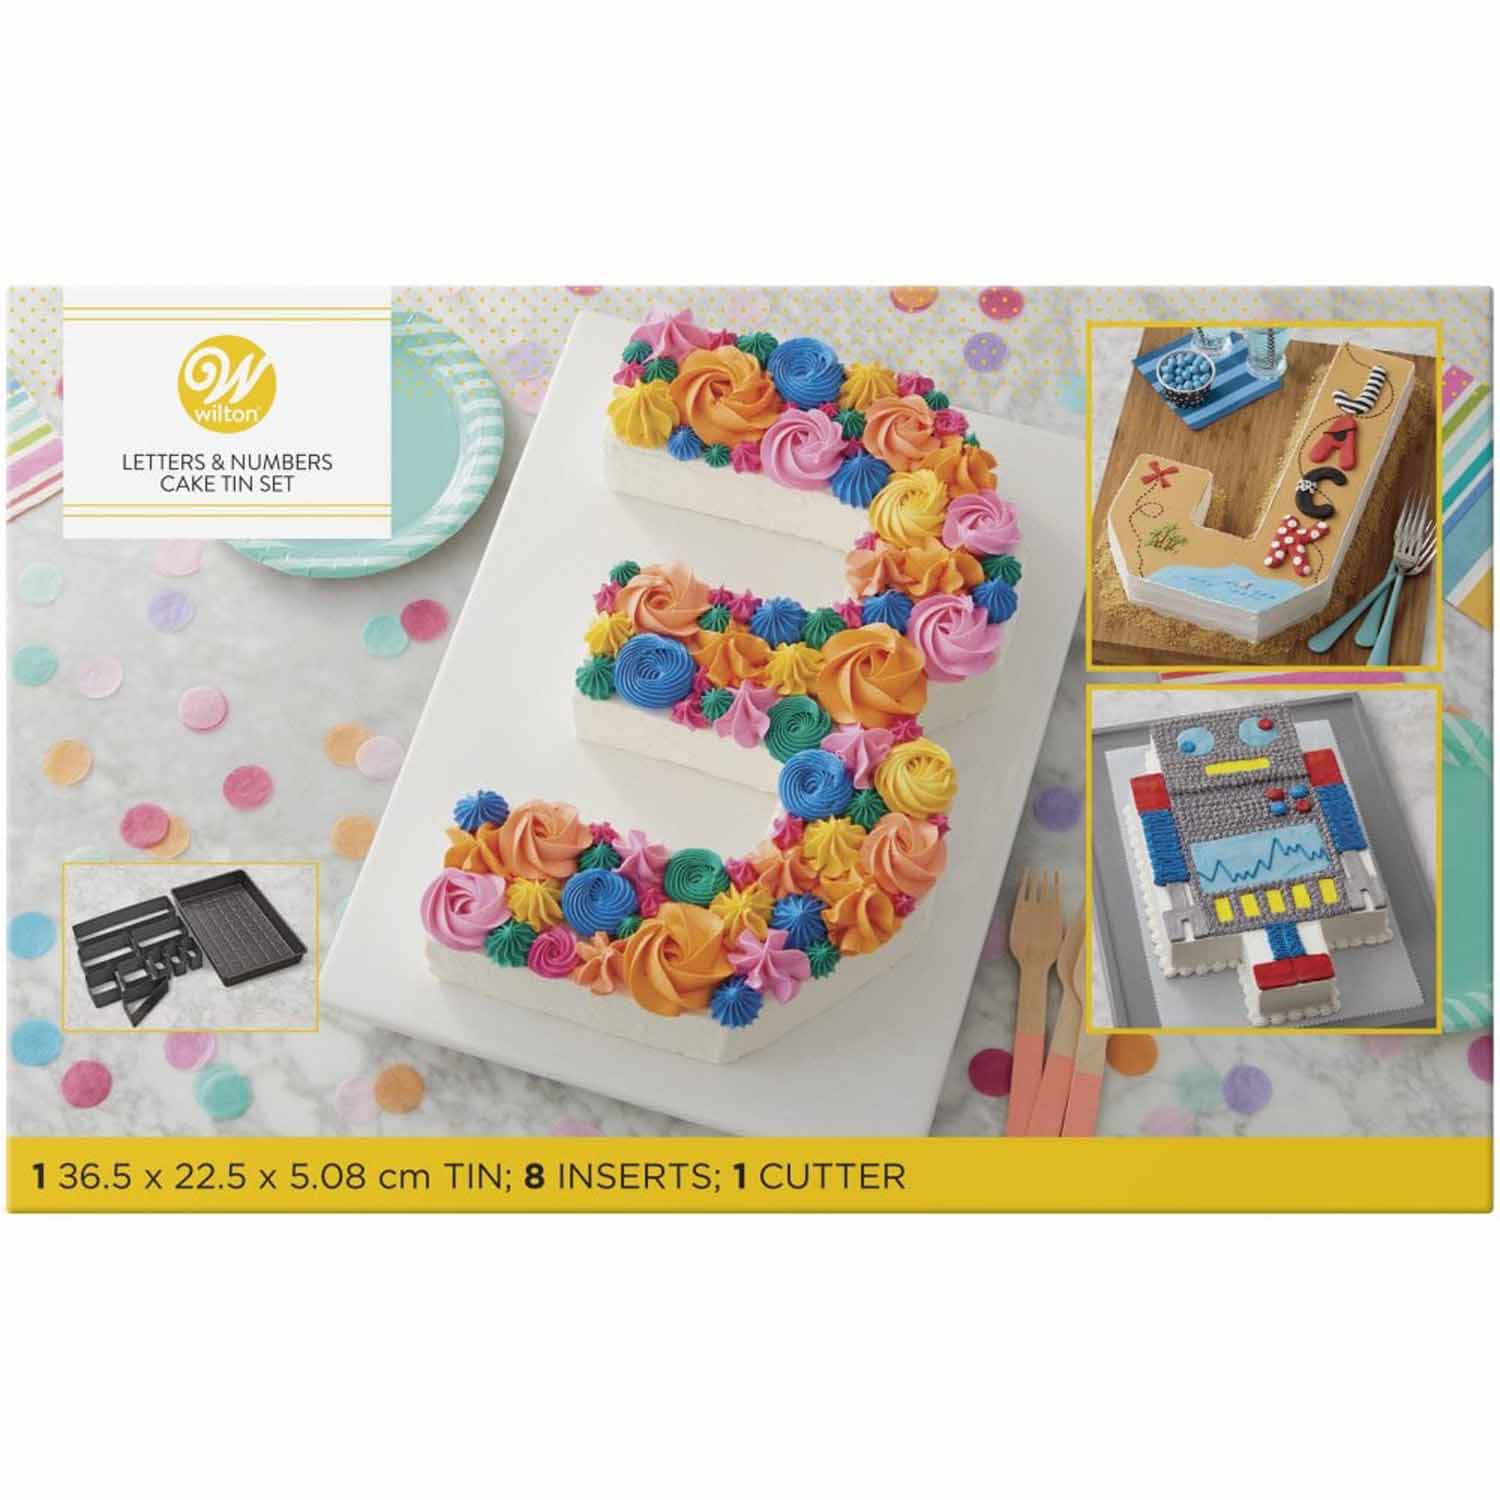 COUNTLESS CELEBRATIONS LETTERS & NUMBERS BAKEWARE SET-W-2105